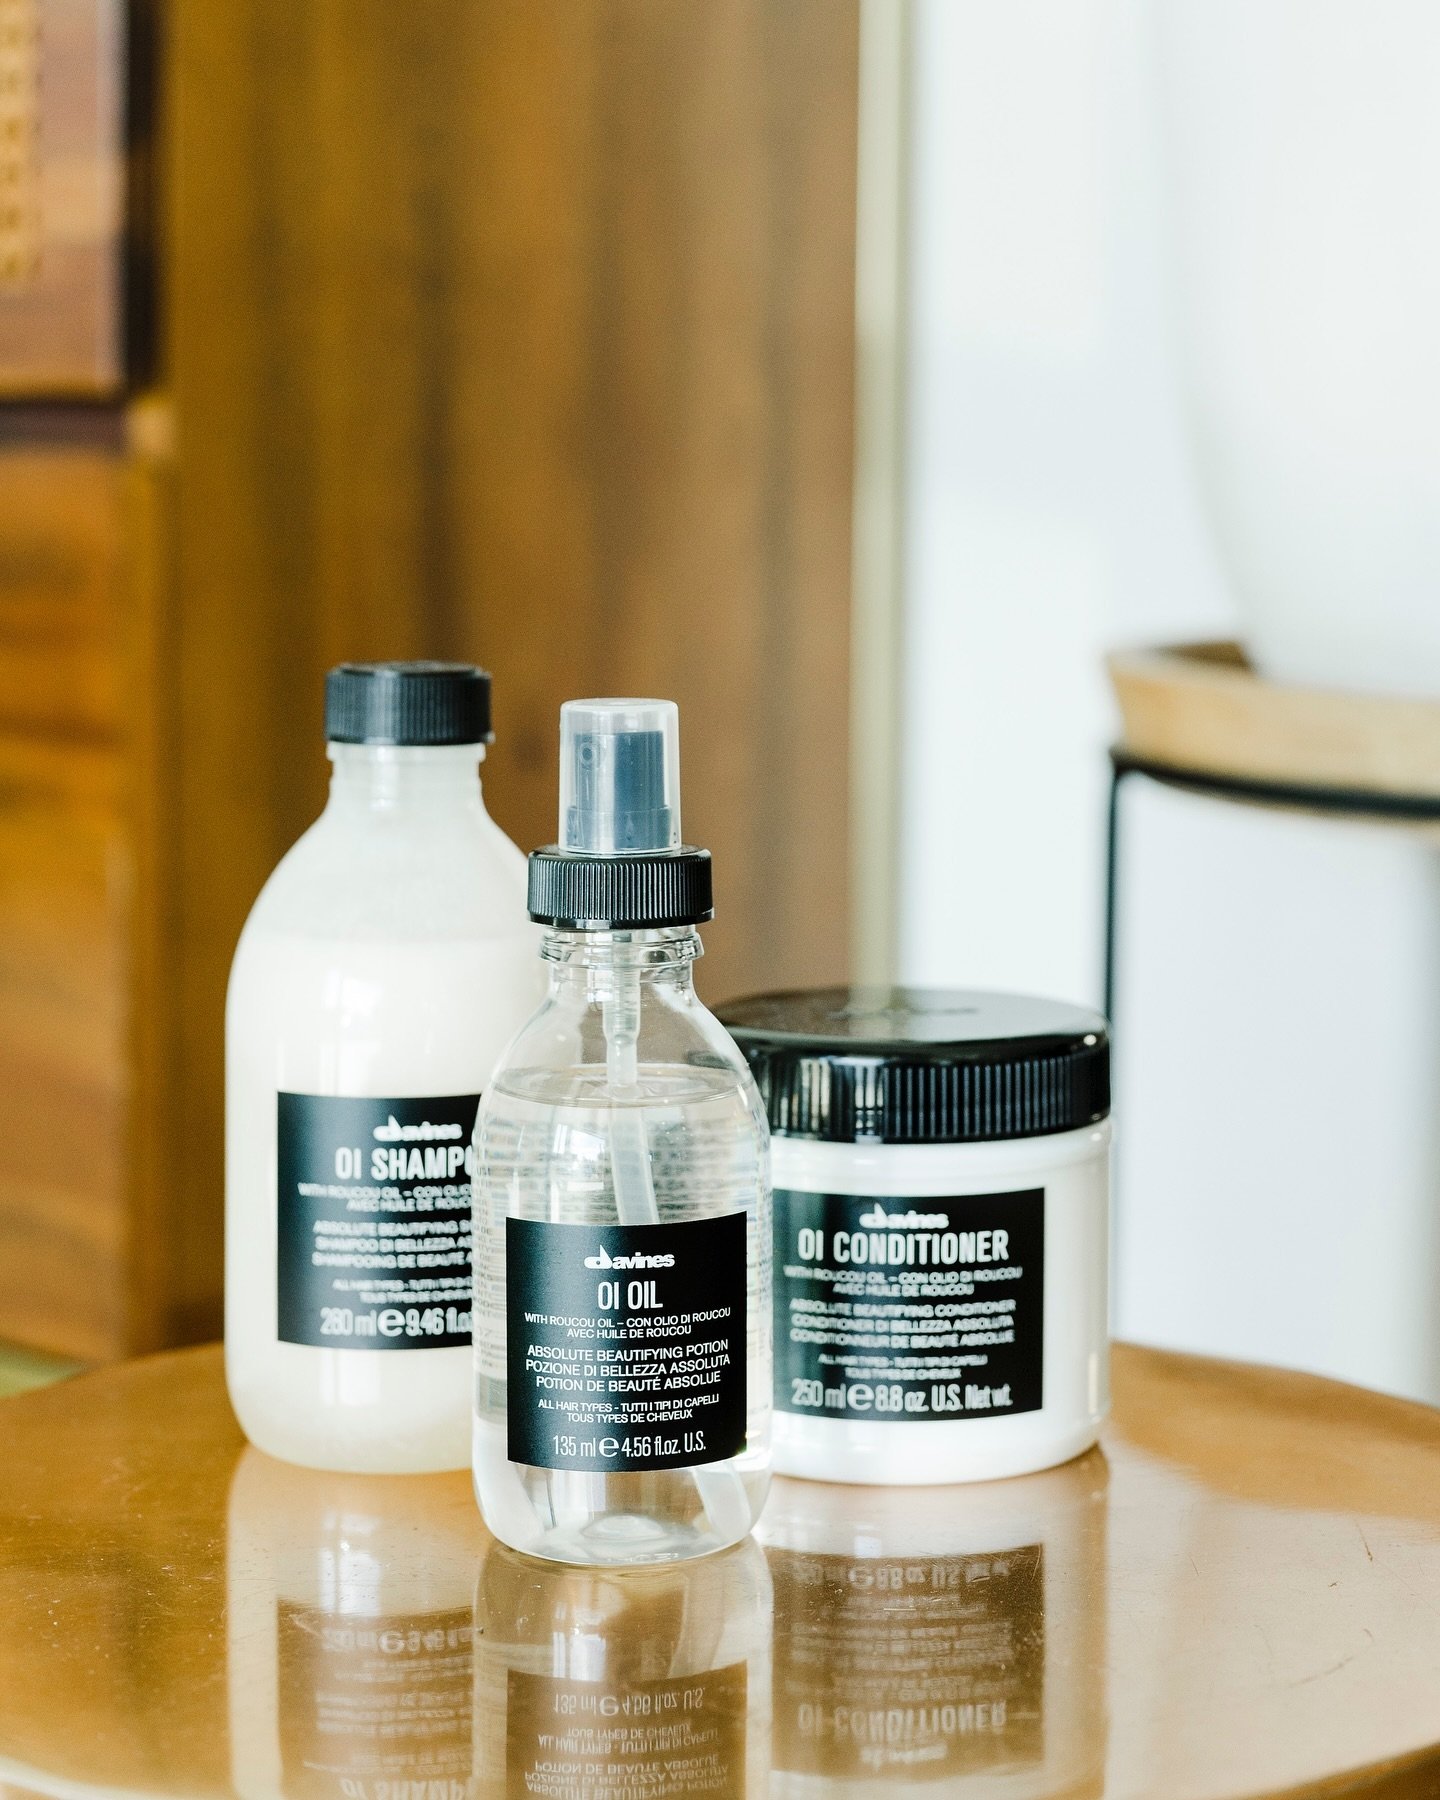 It&rsquo;s Treatment Tuesday, and we&rsquo;re shining the spotlight on one of our absolute favorites: the Davines Oi Line! ✨

Oi Shampoo: This is perfect for all hair types while providing a gentle cleanse that leaves your hair feeling soft, smooth, 